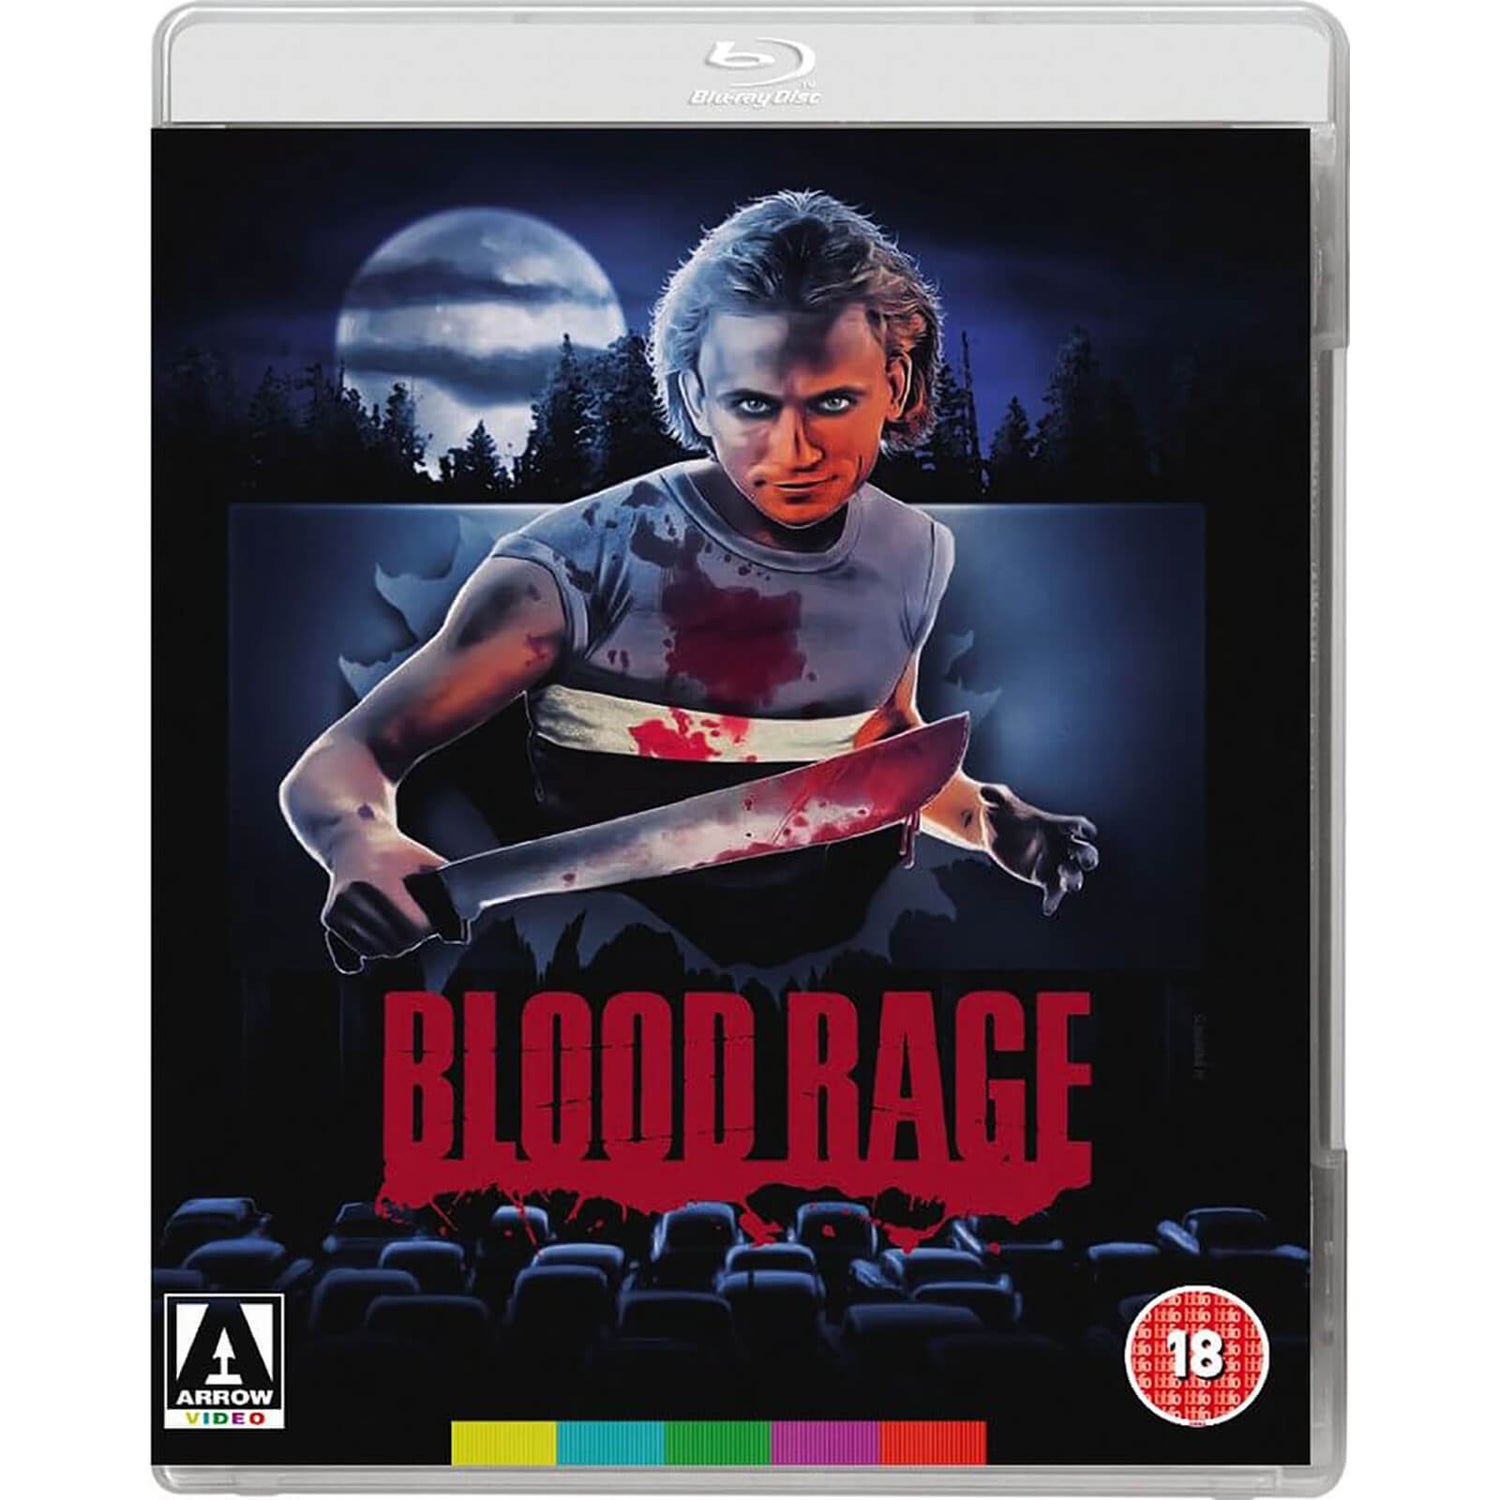 Blood Rage (Includes DVD)